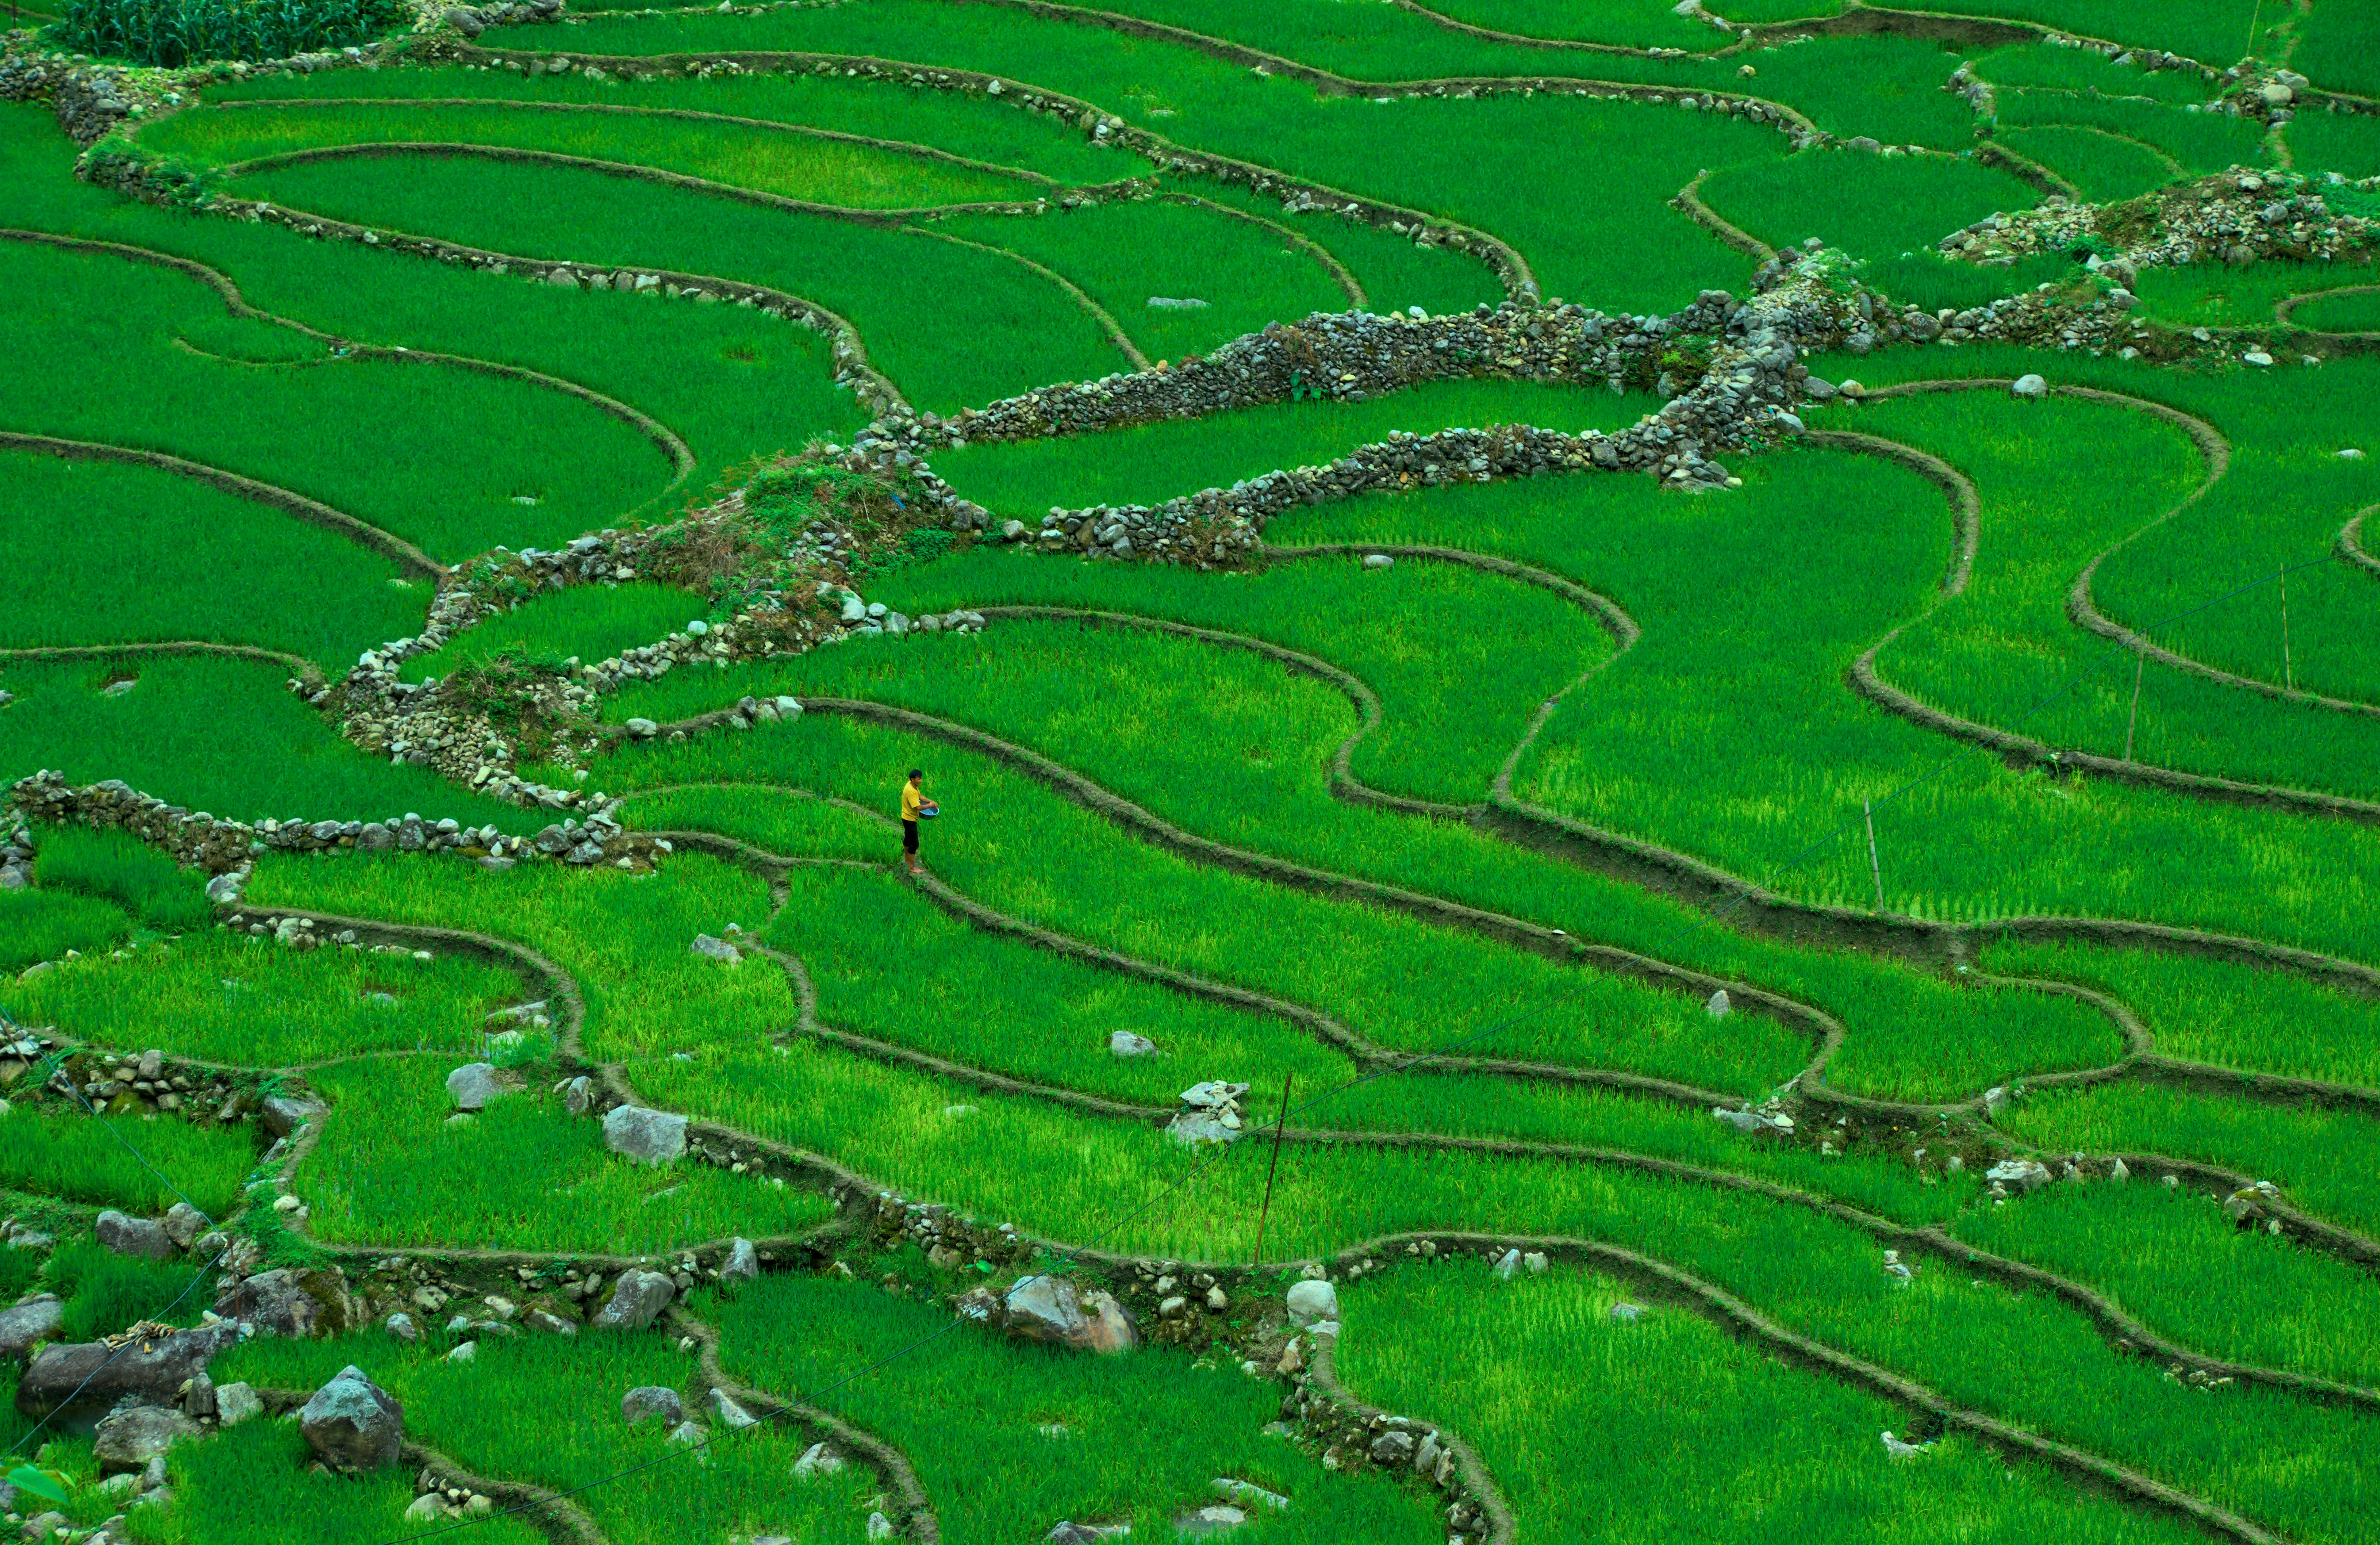 This photo was taken overlooking a farmer in the rice terraces of Sa Pa, Vietnam.